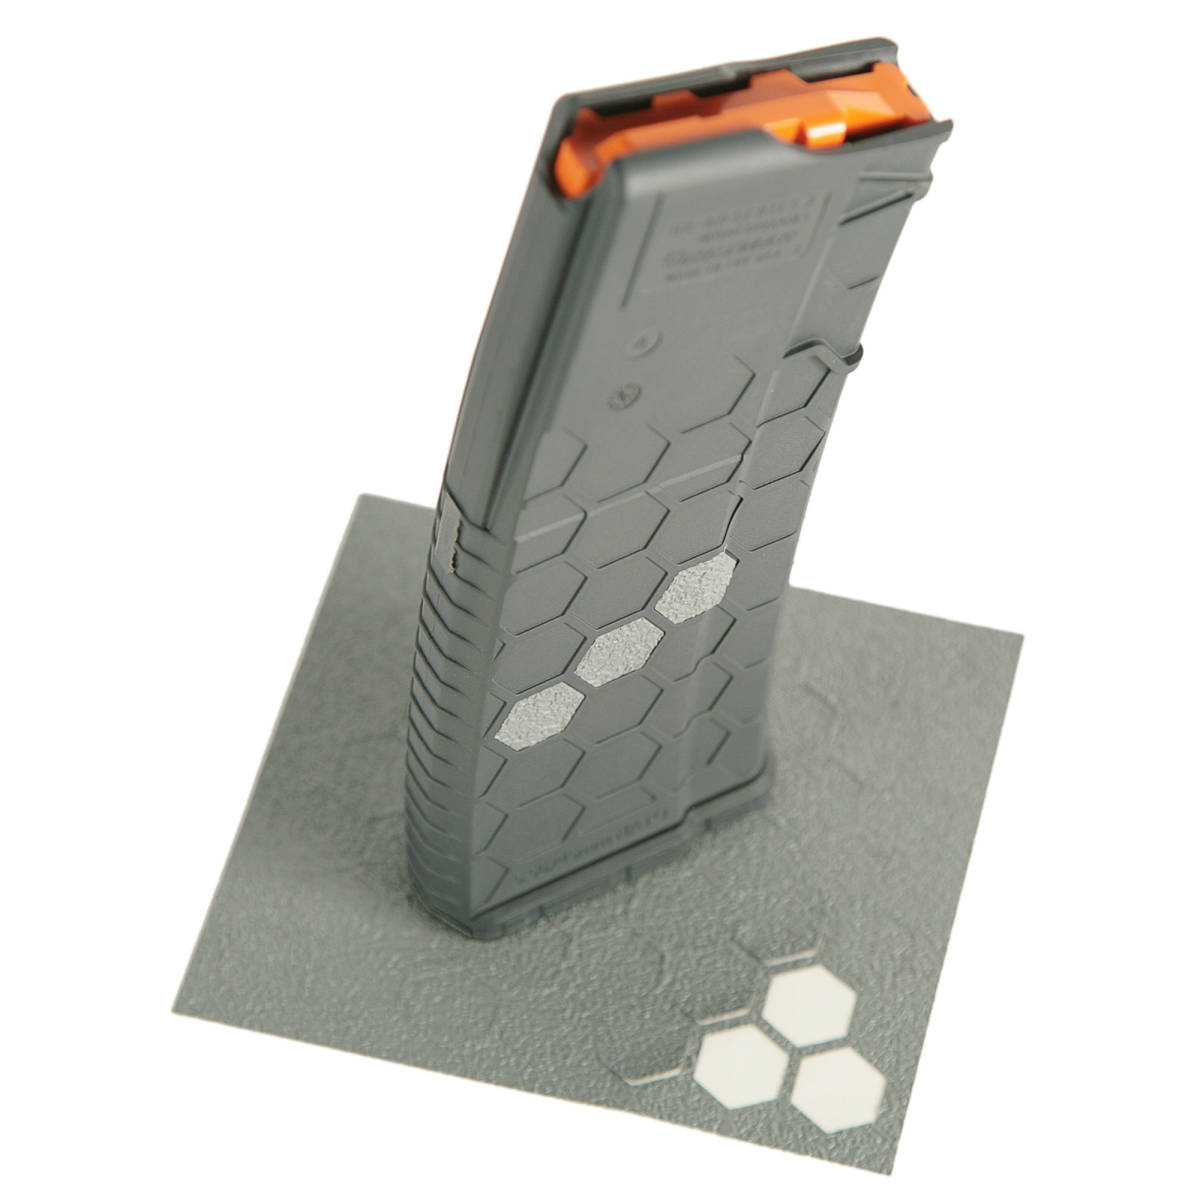 Hexmag HXGTGRY Grip Tape with Gray Finish & Hexagon Shape for Magazines...-img-1